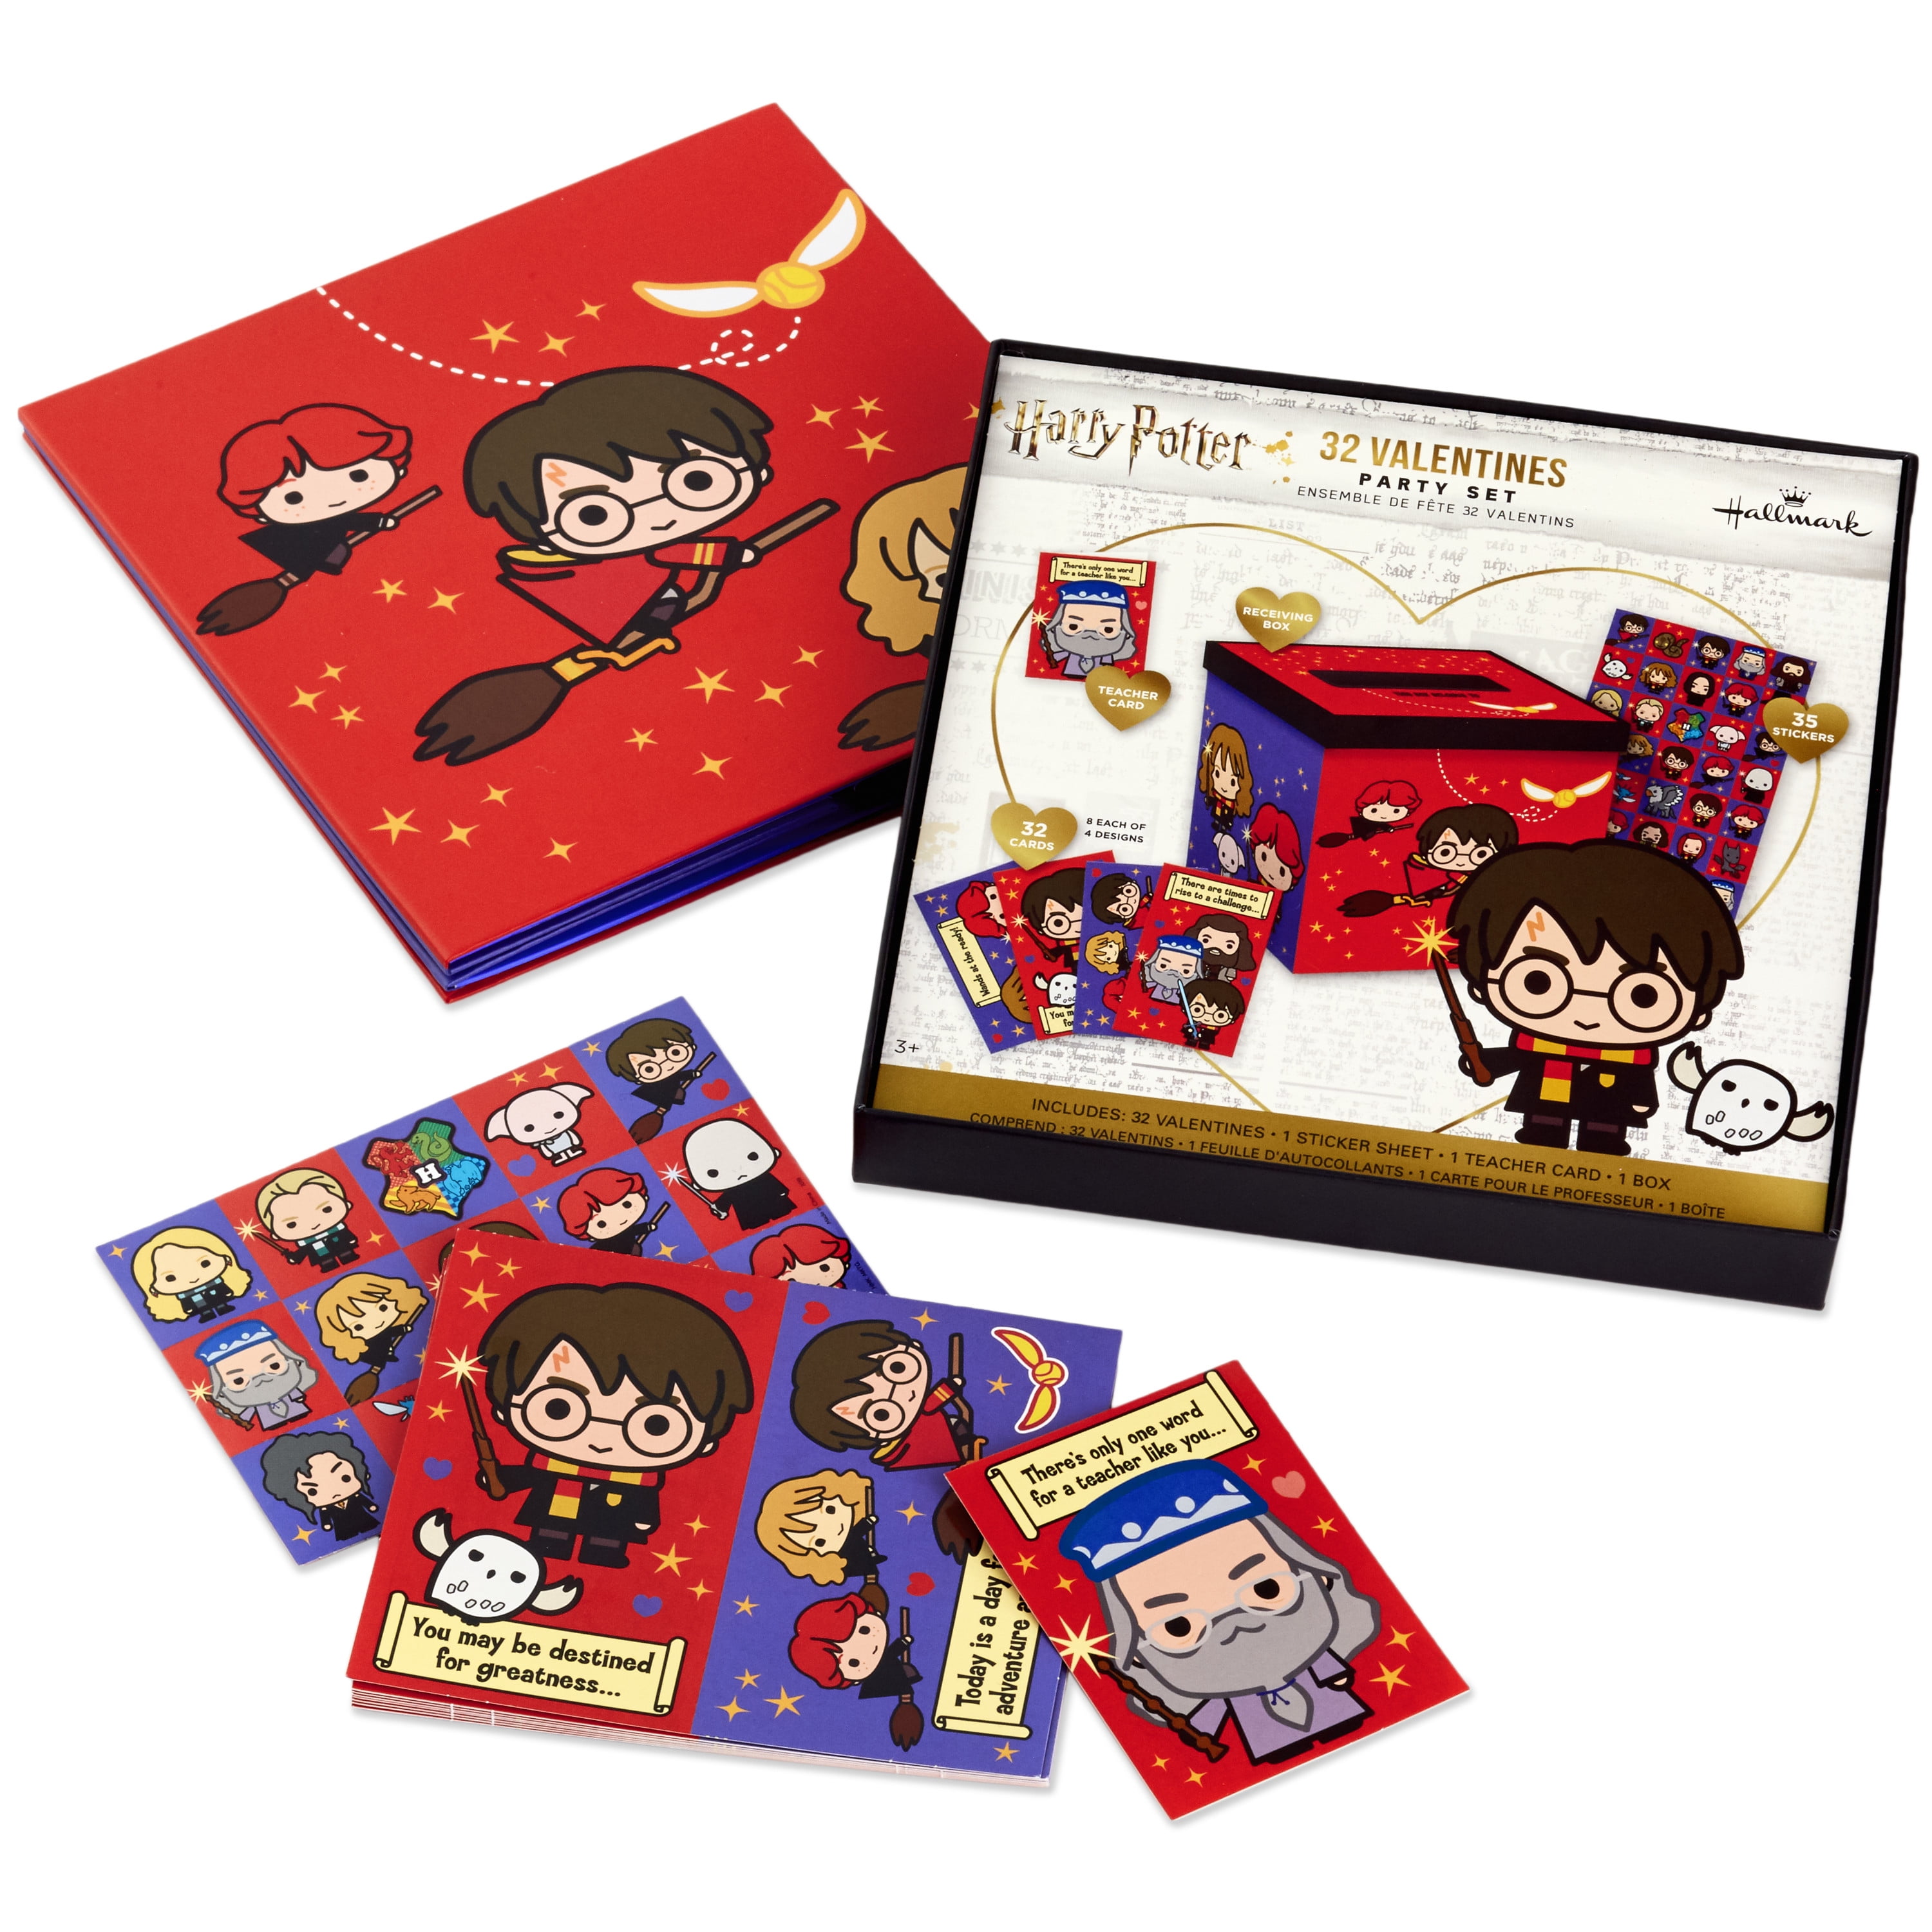 Hallmark Valentines Day Cards for Kids and Mailbox for Classroom Exchange 1 Box, 32 Valentine Cards, 35 Stickers, 1 Teacher Card 5VBX2958 Harry Potter